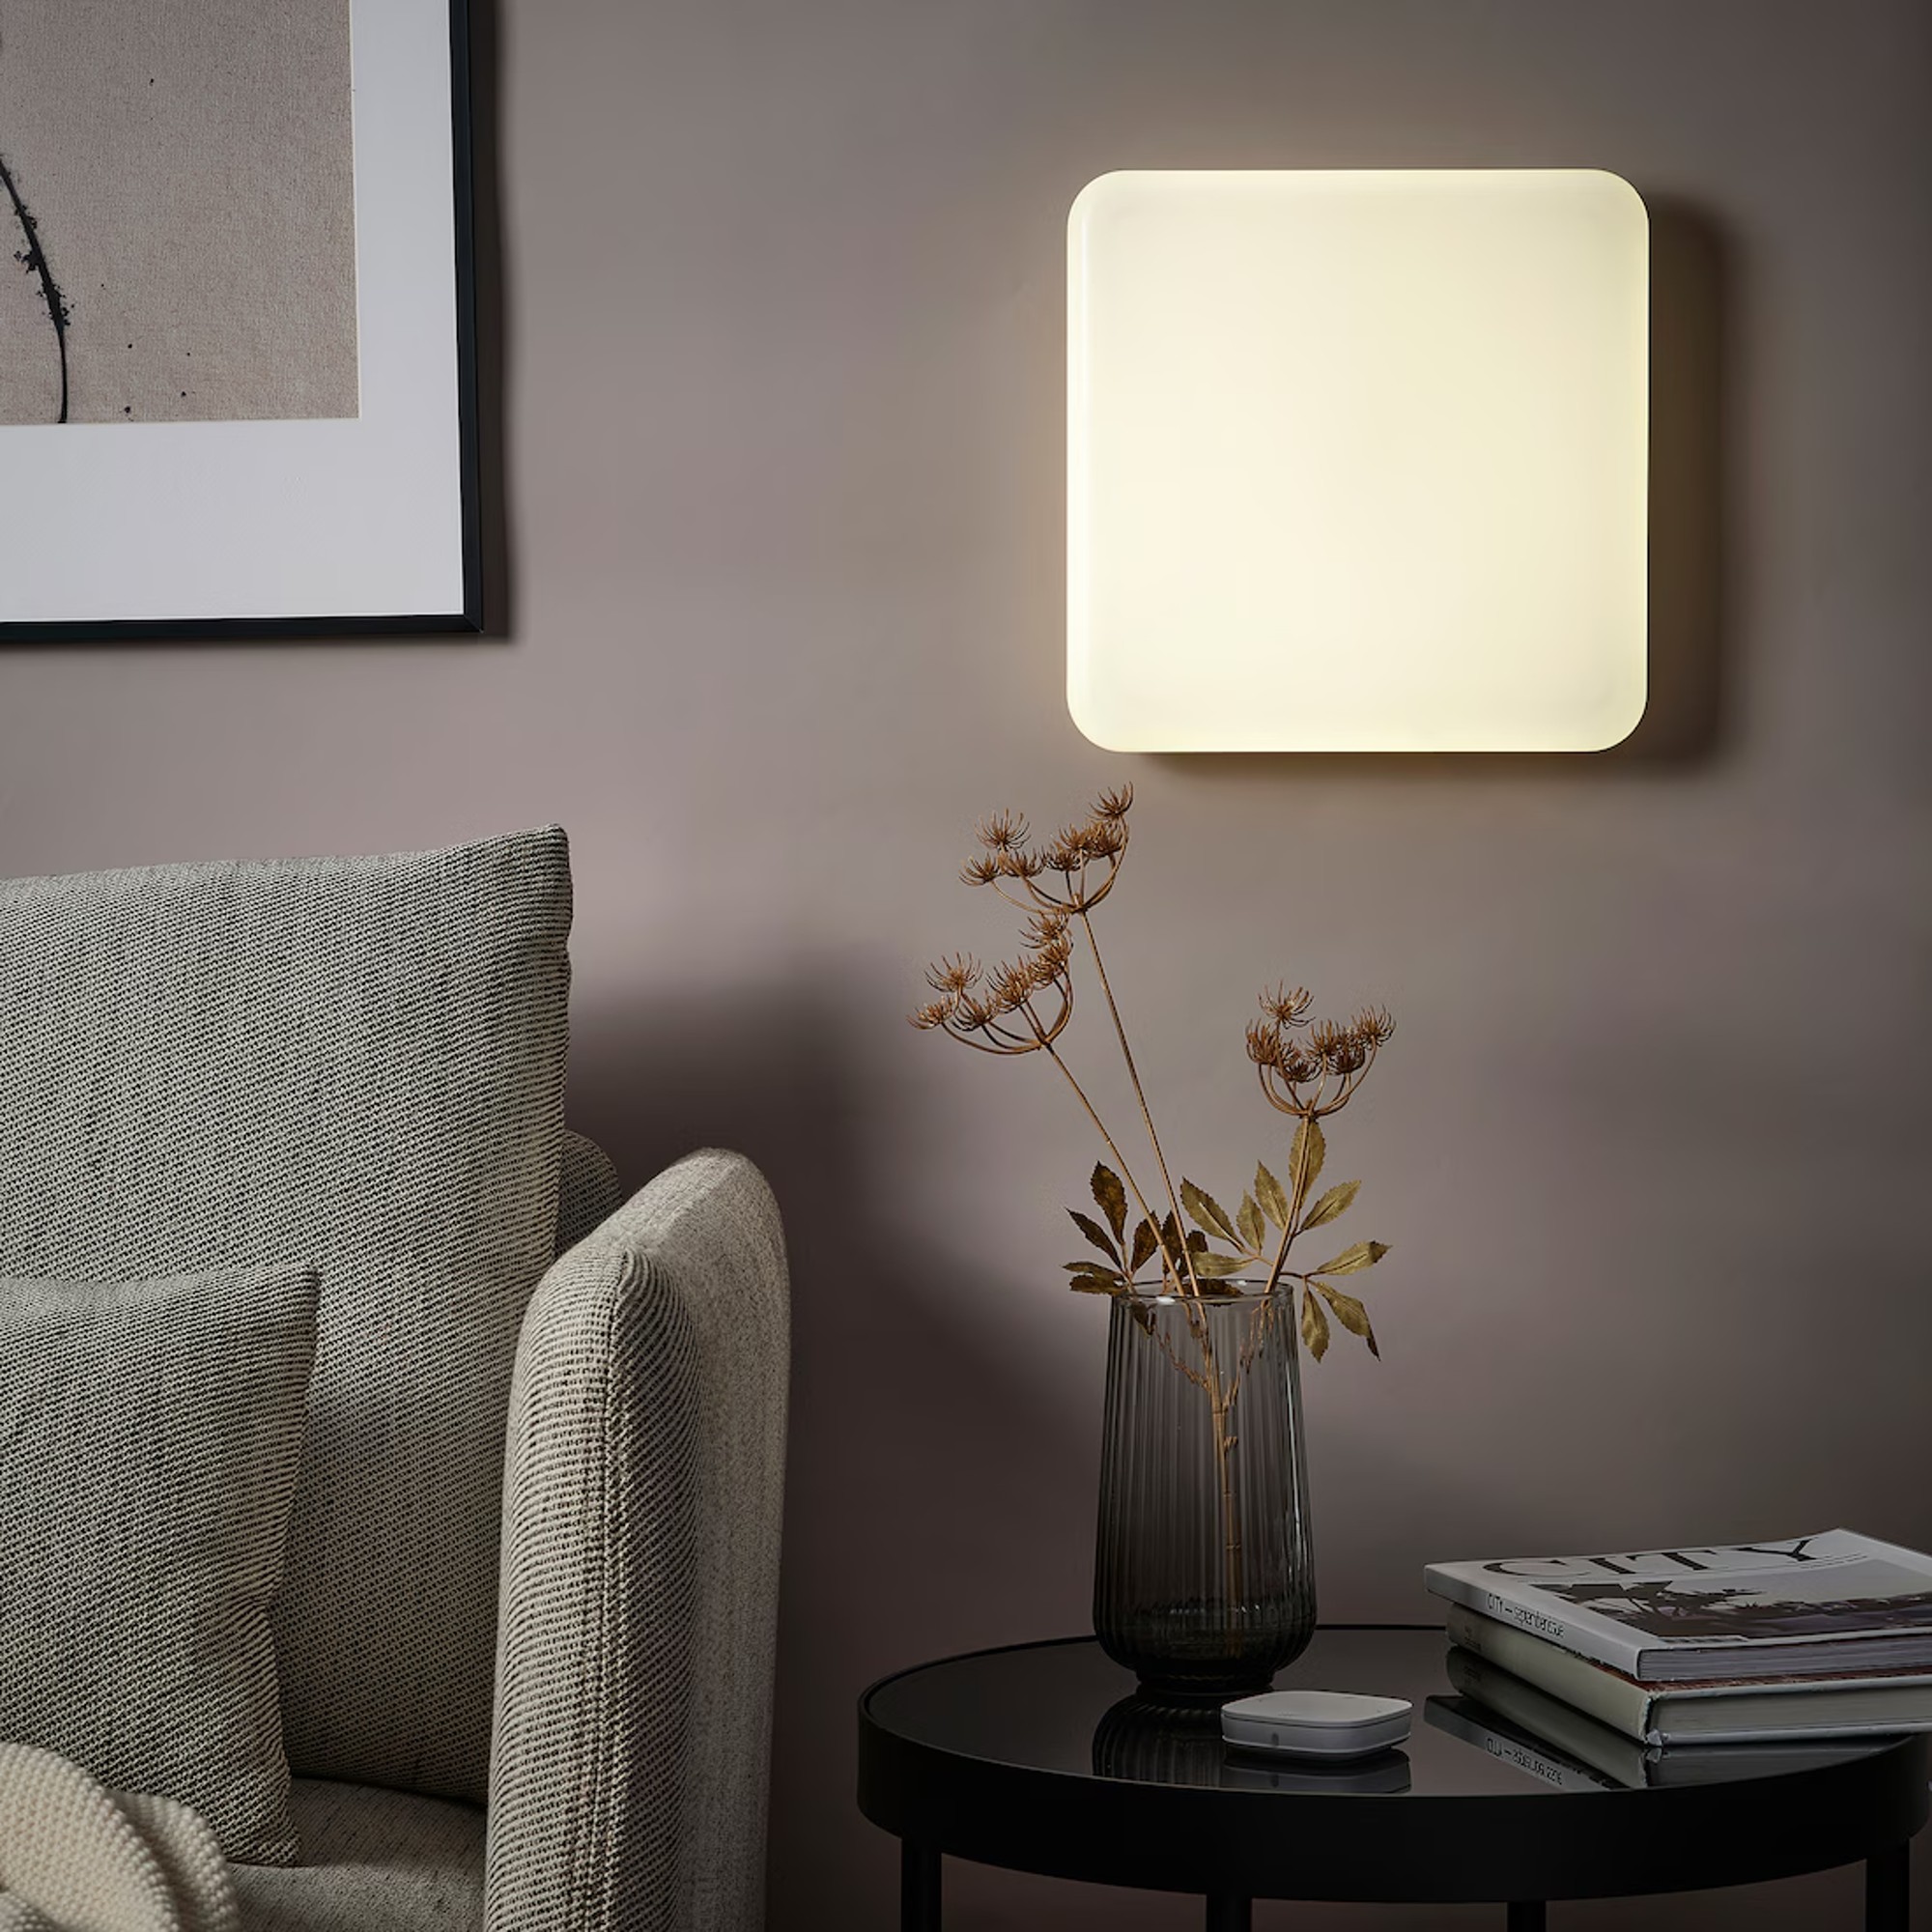 IKEA JETSTRÖM LED wall light panel on a wall in a living room next to a beige armchair